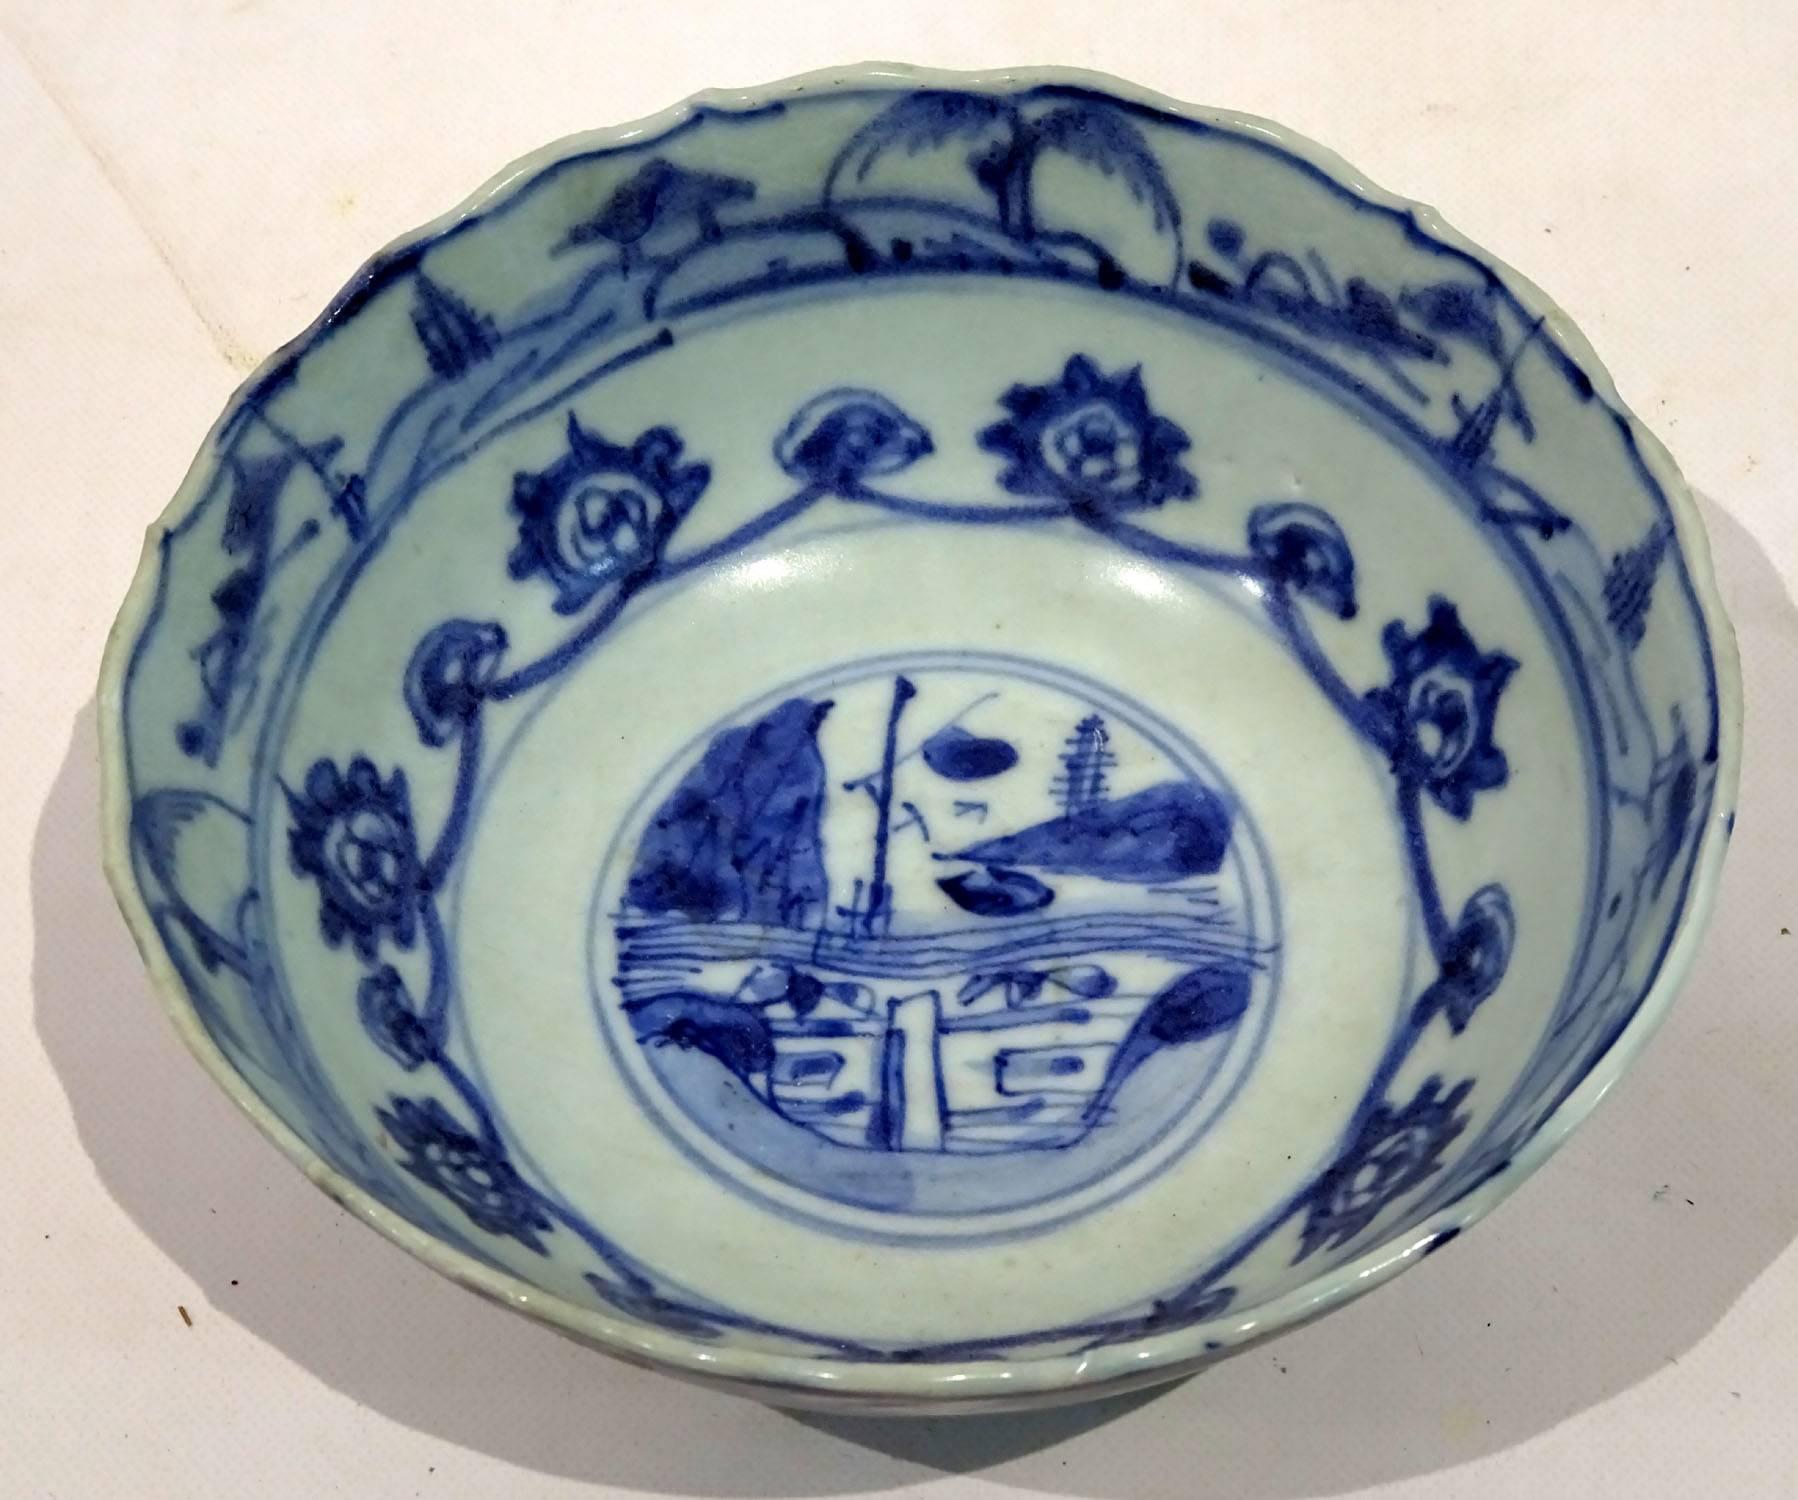 17th century Chinese blue and white porcelain bowl from The Hatcher Collection, salvaged by Captain Michael Hatcher in the early 1980s, purchased from Christies in Amsterdam in 1984.